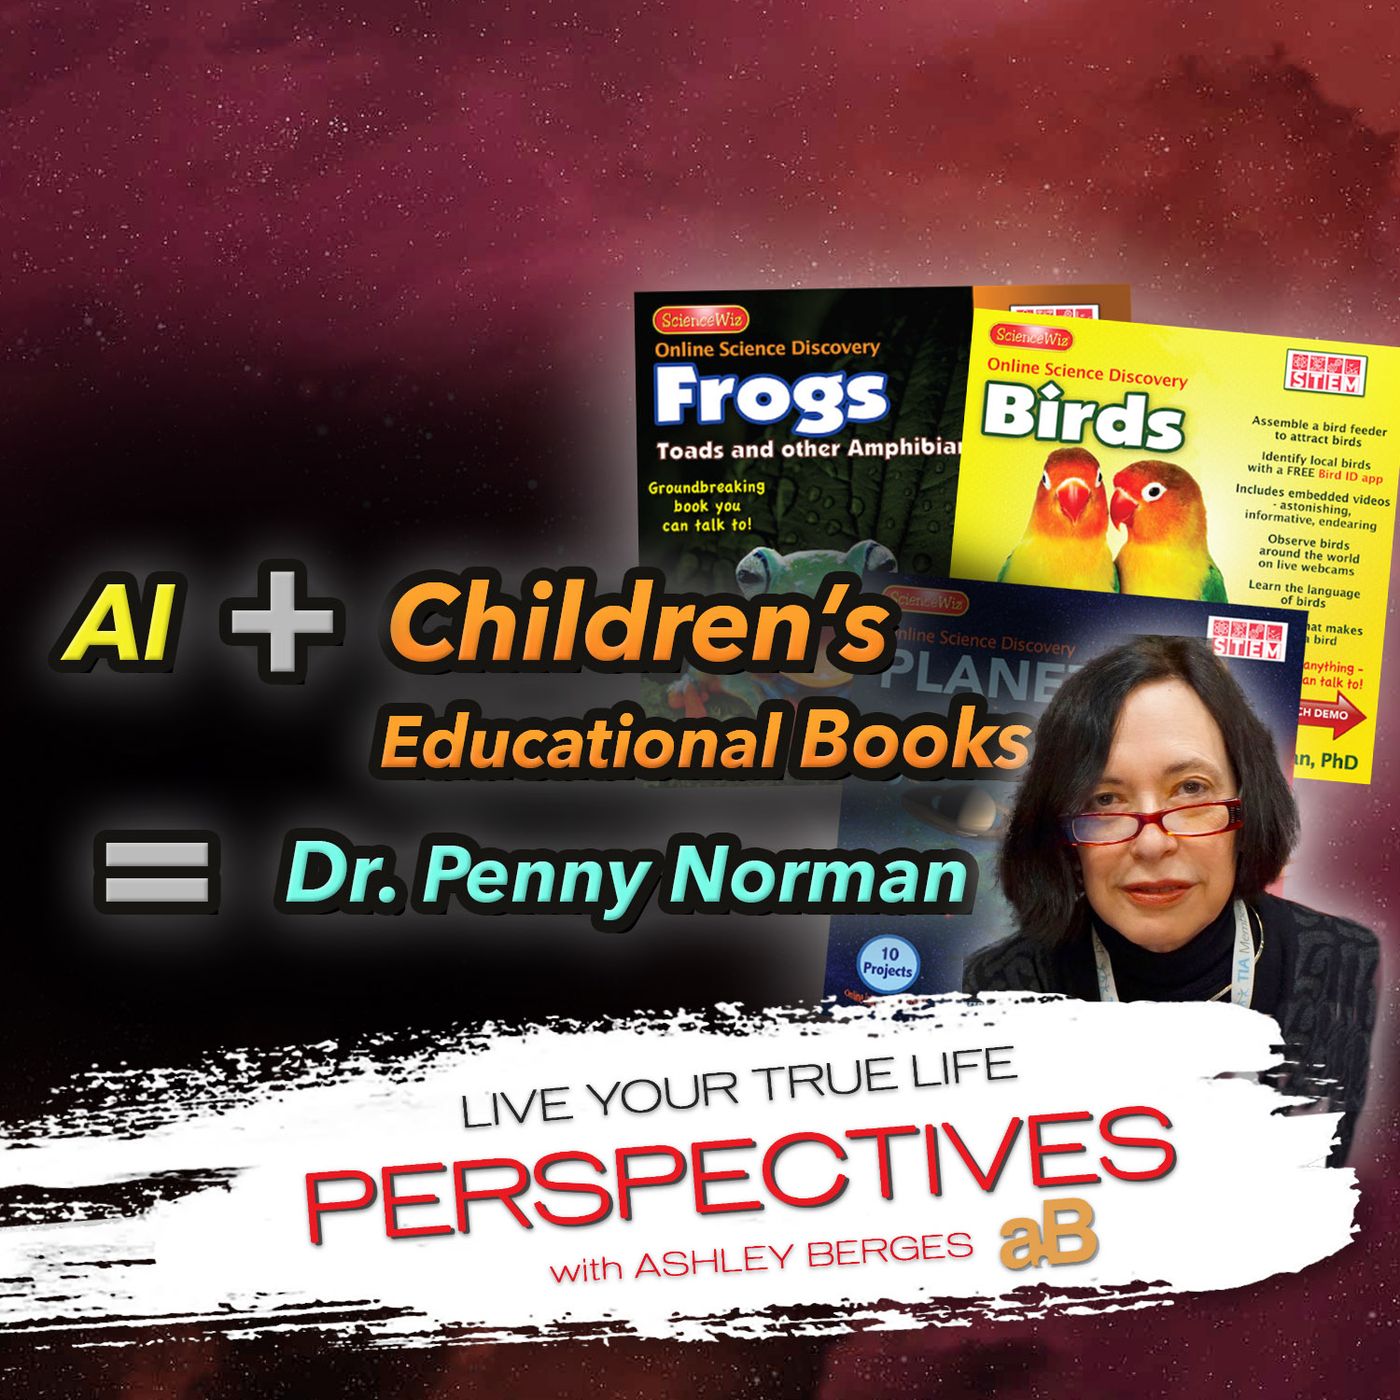 Combining AI and Children’s Educational Books. An Interview with Dr. Penny Norman [Ep.769]